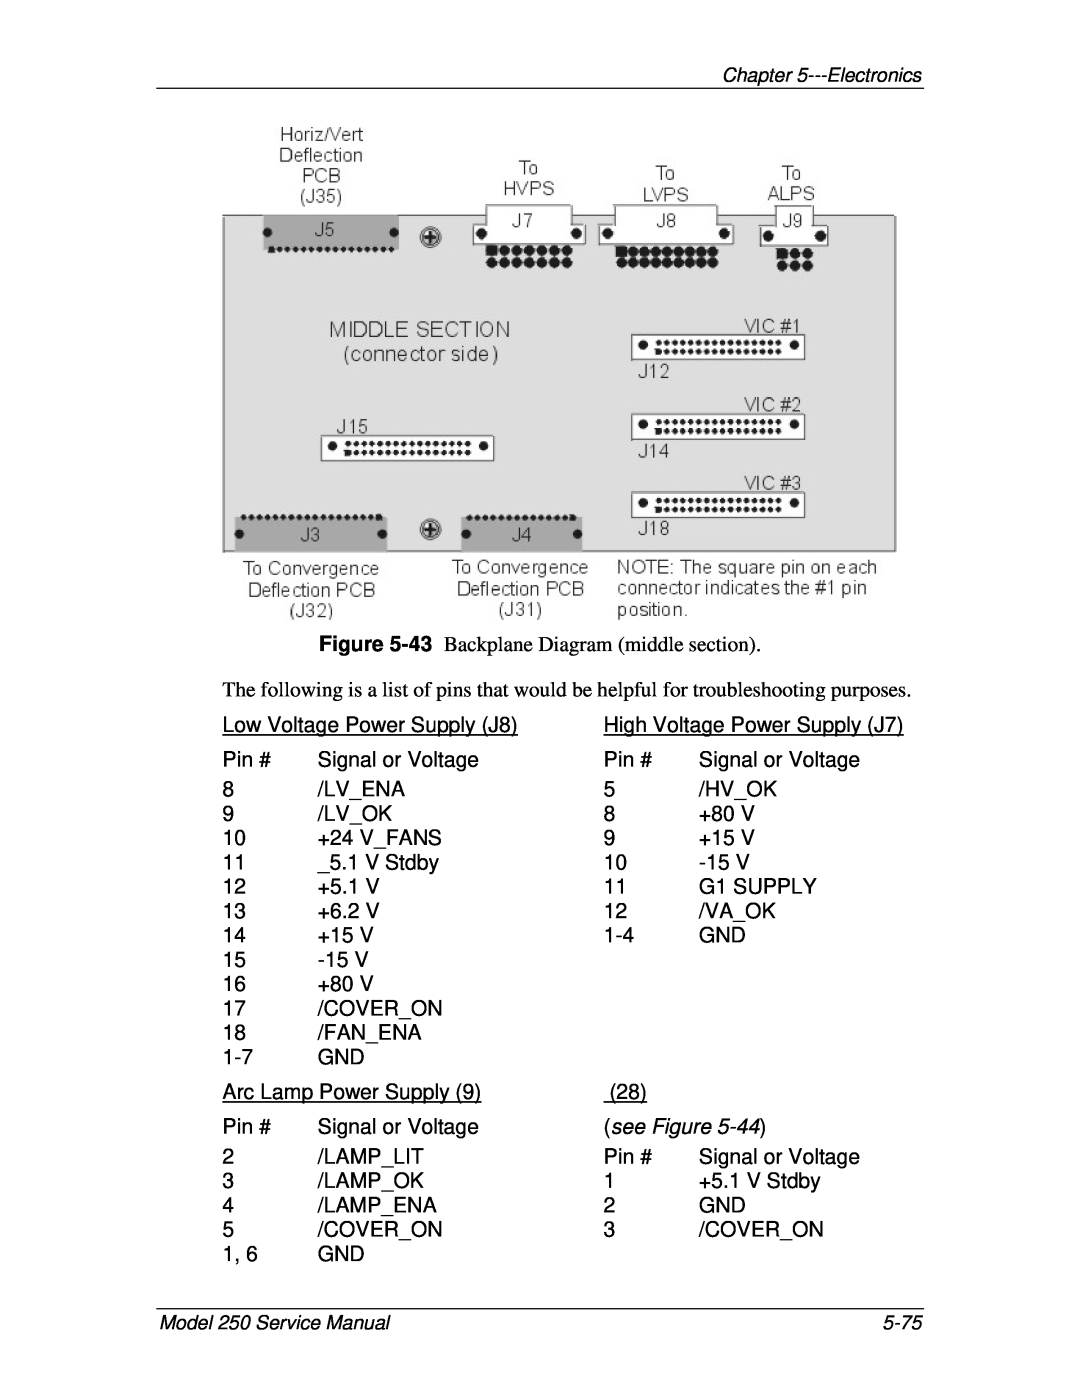 JVC 250 service manual 43 Backplane Diagram middle section, see Figure 